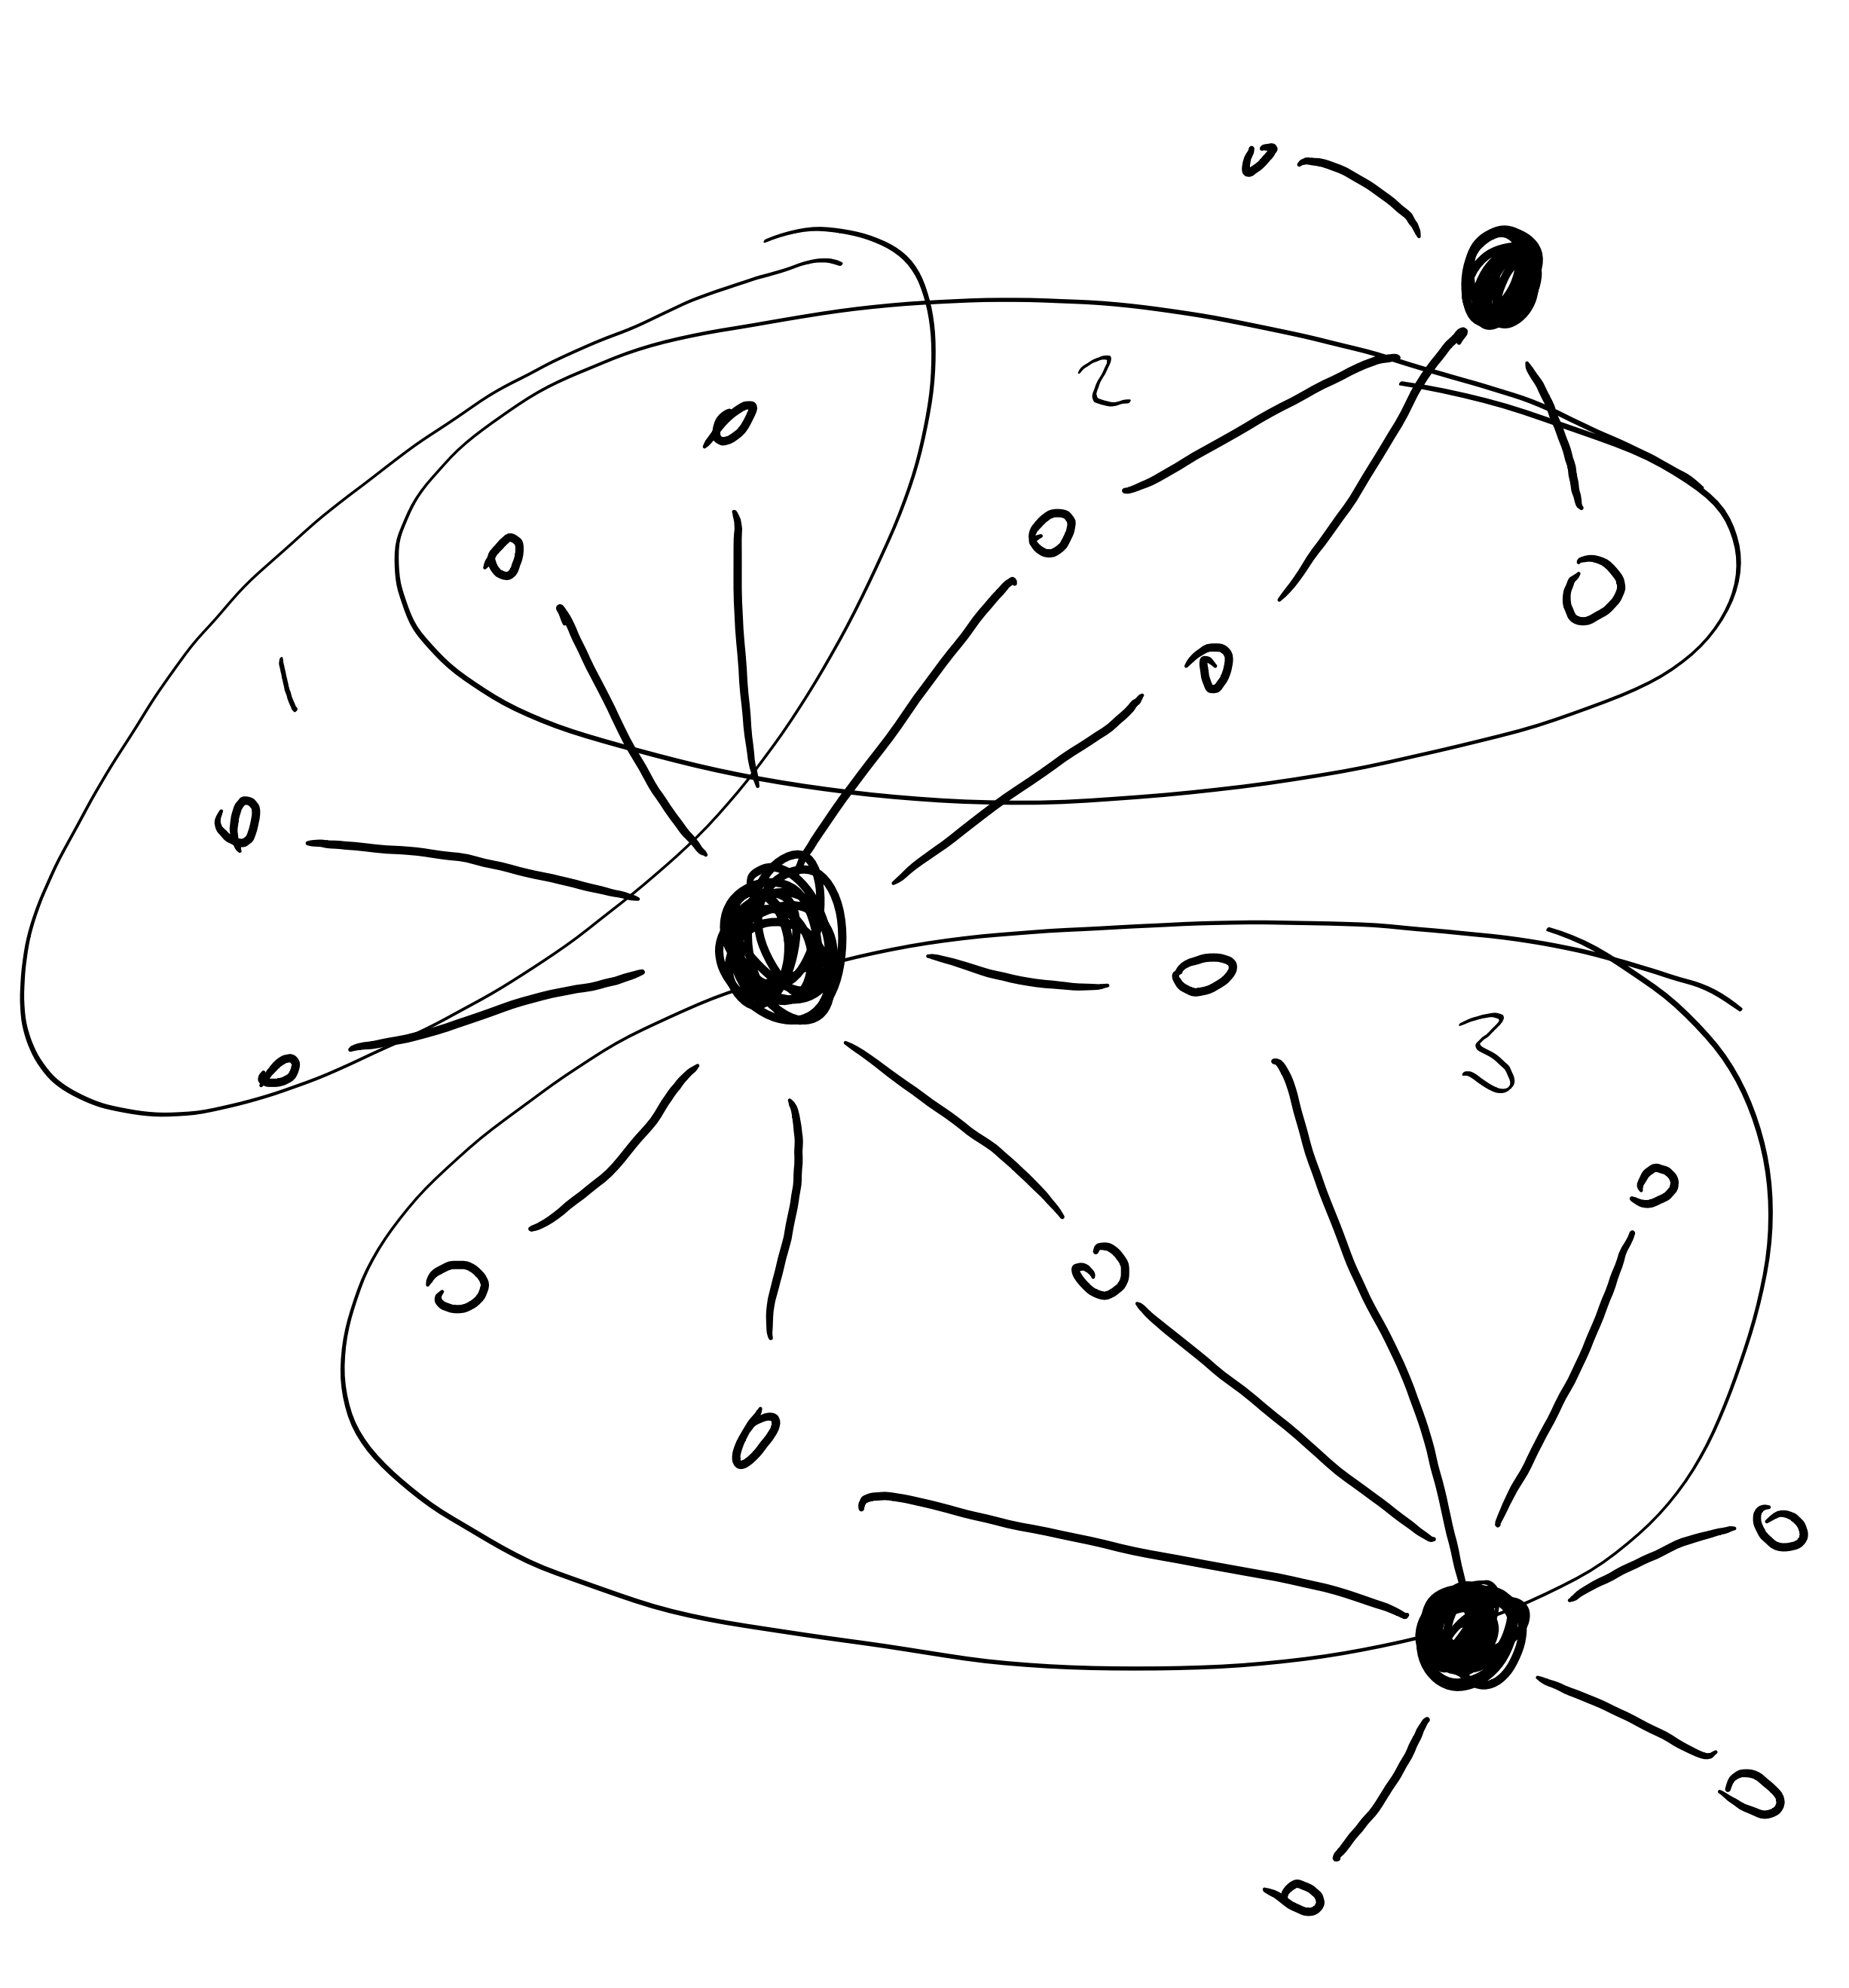 Hub and spoke diagram with multiple hubs, and clusters of nodes attached to the spokes grouped as 'communities'